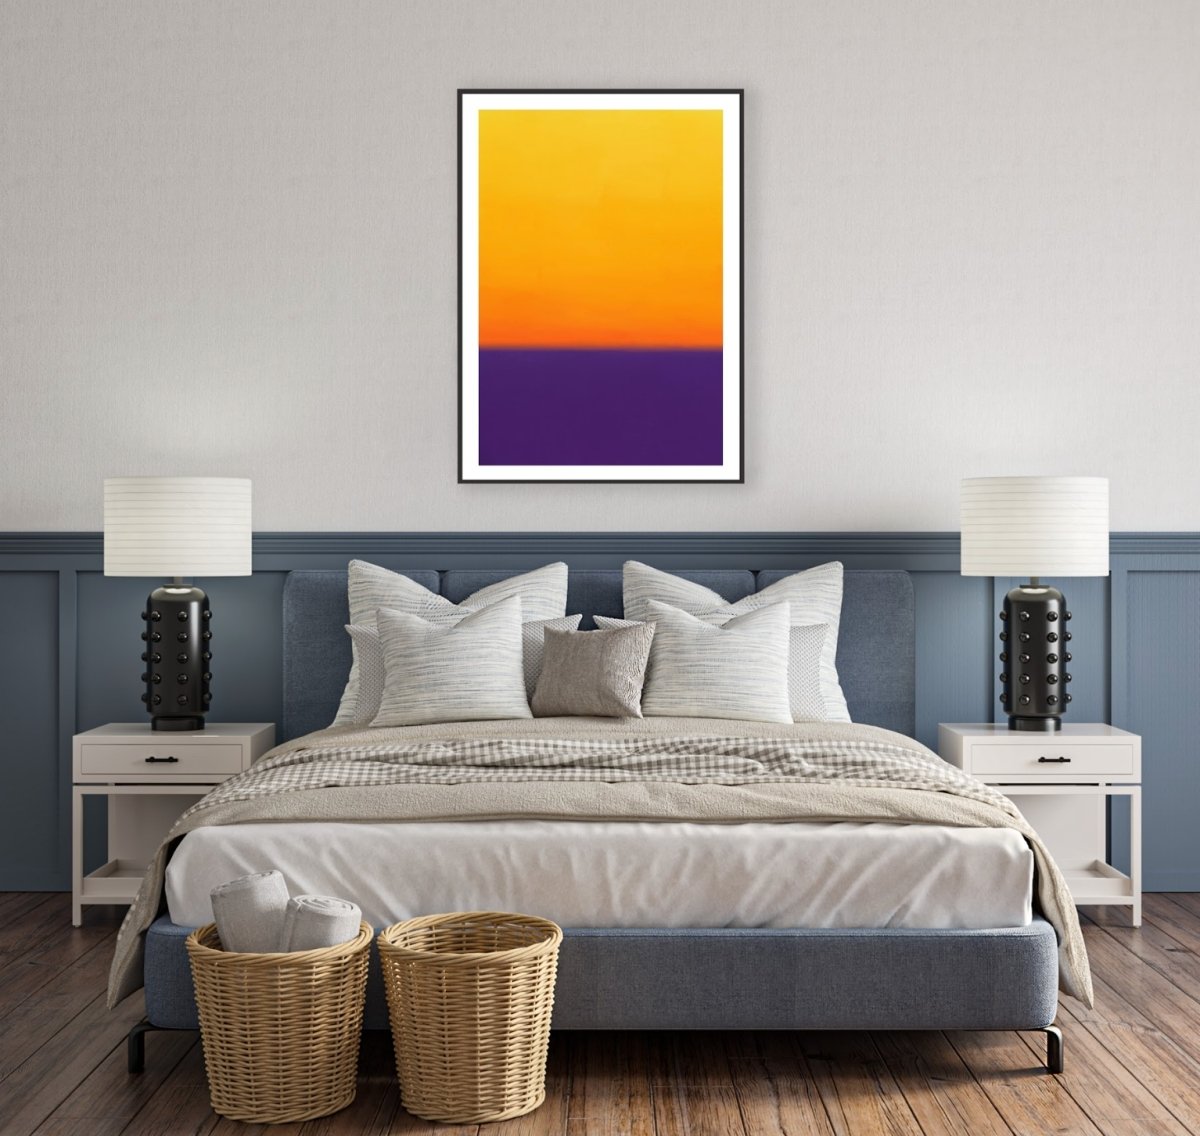 16 x 20 Gallery Series Cotton Canvas by Artsmith